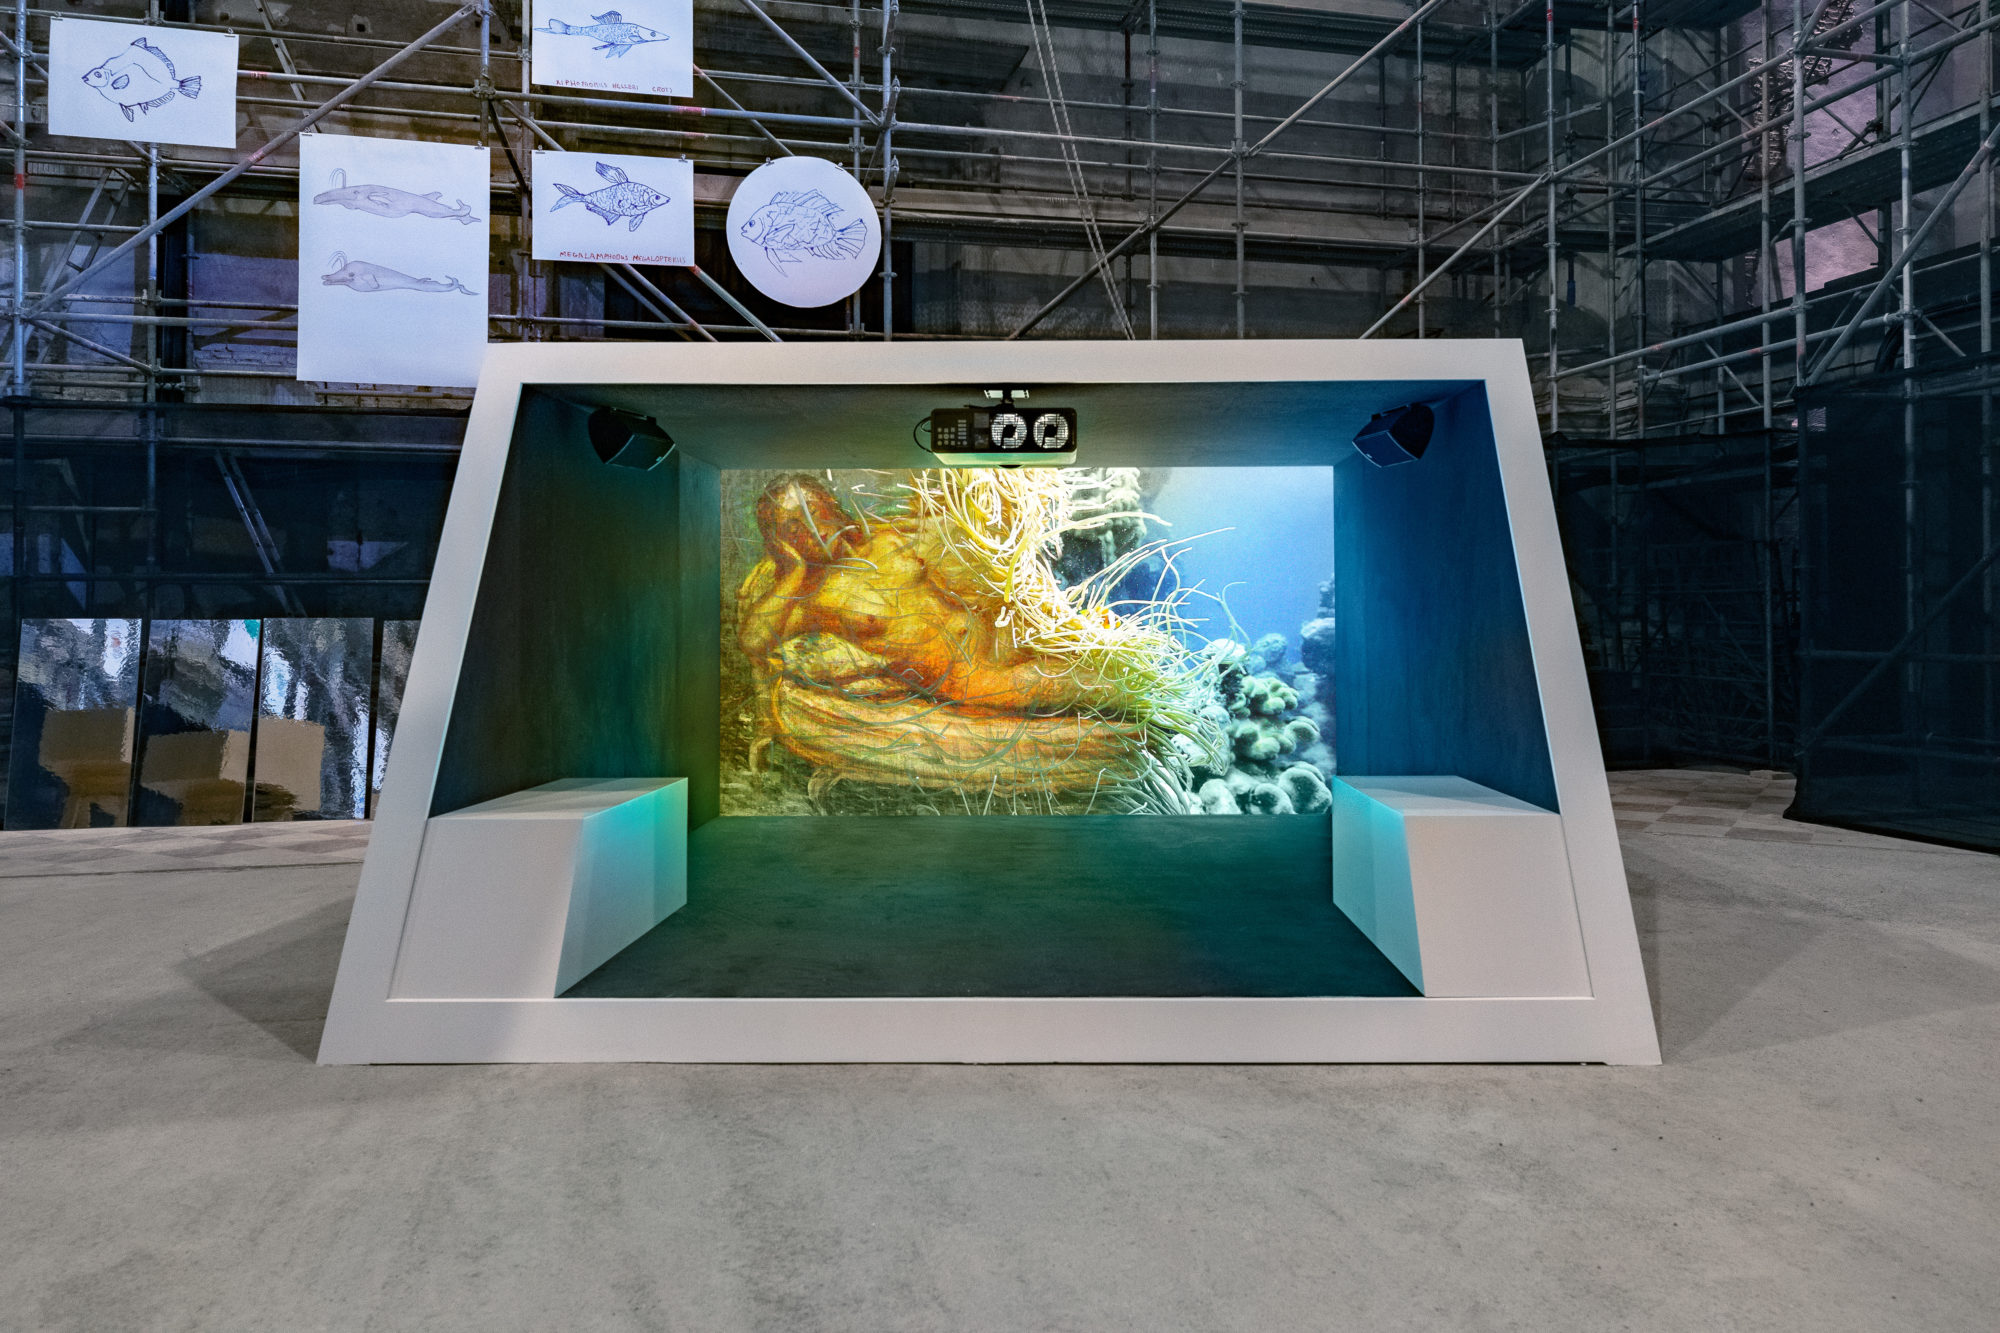 Installation view of a video focused on a yellow mermaid underwater.